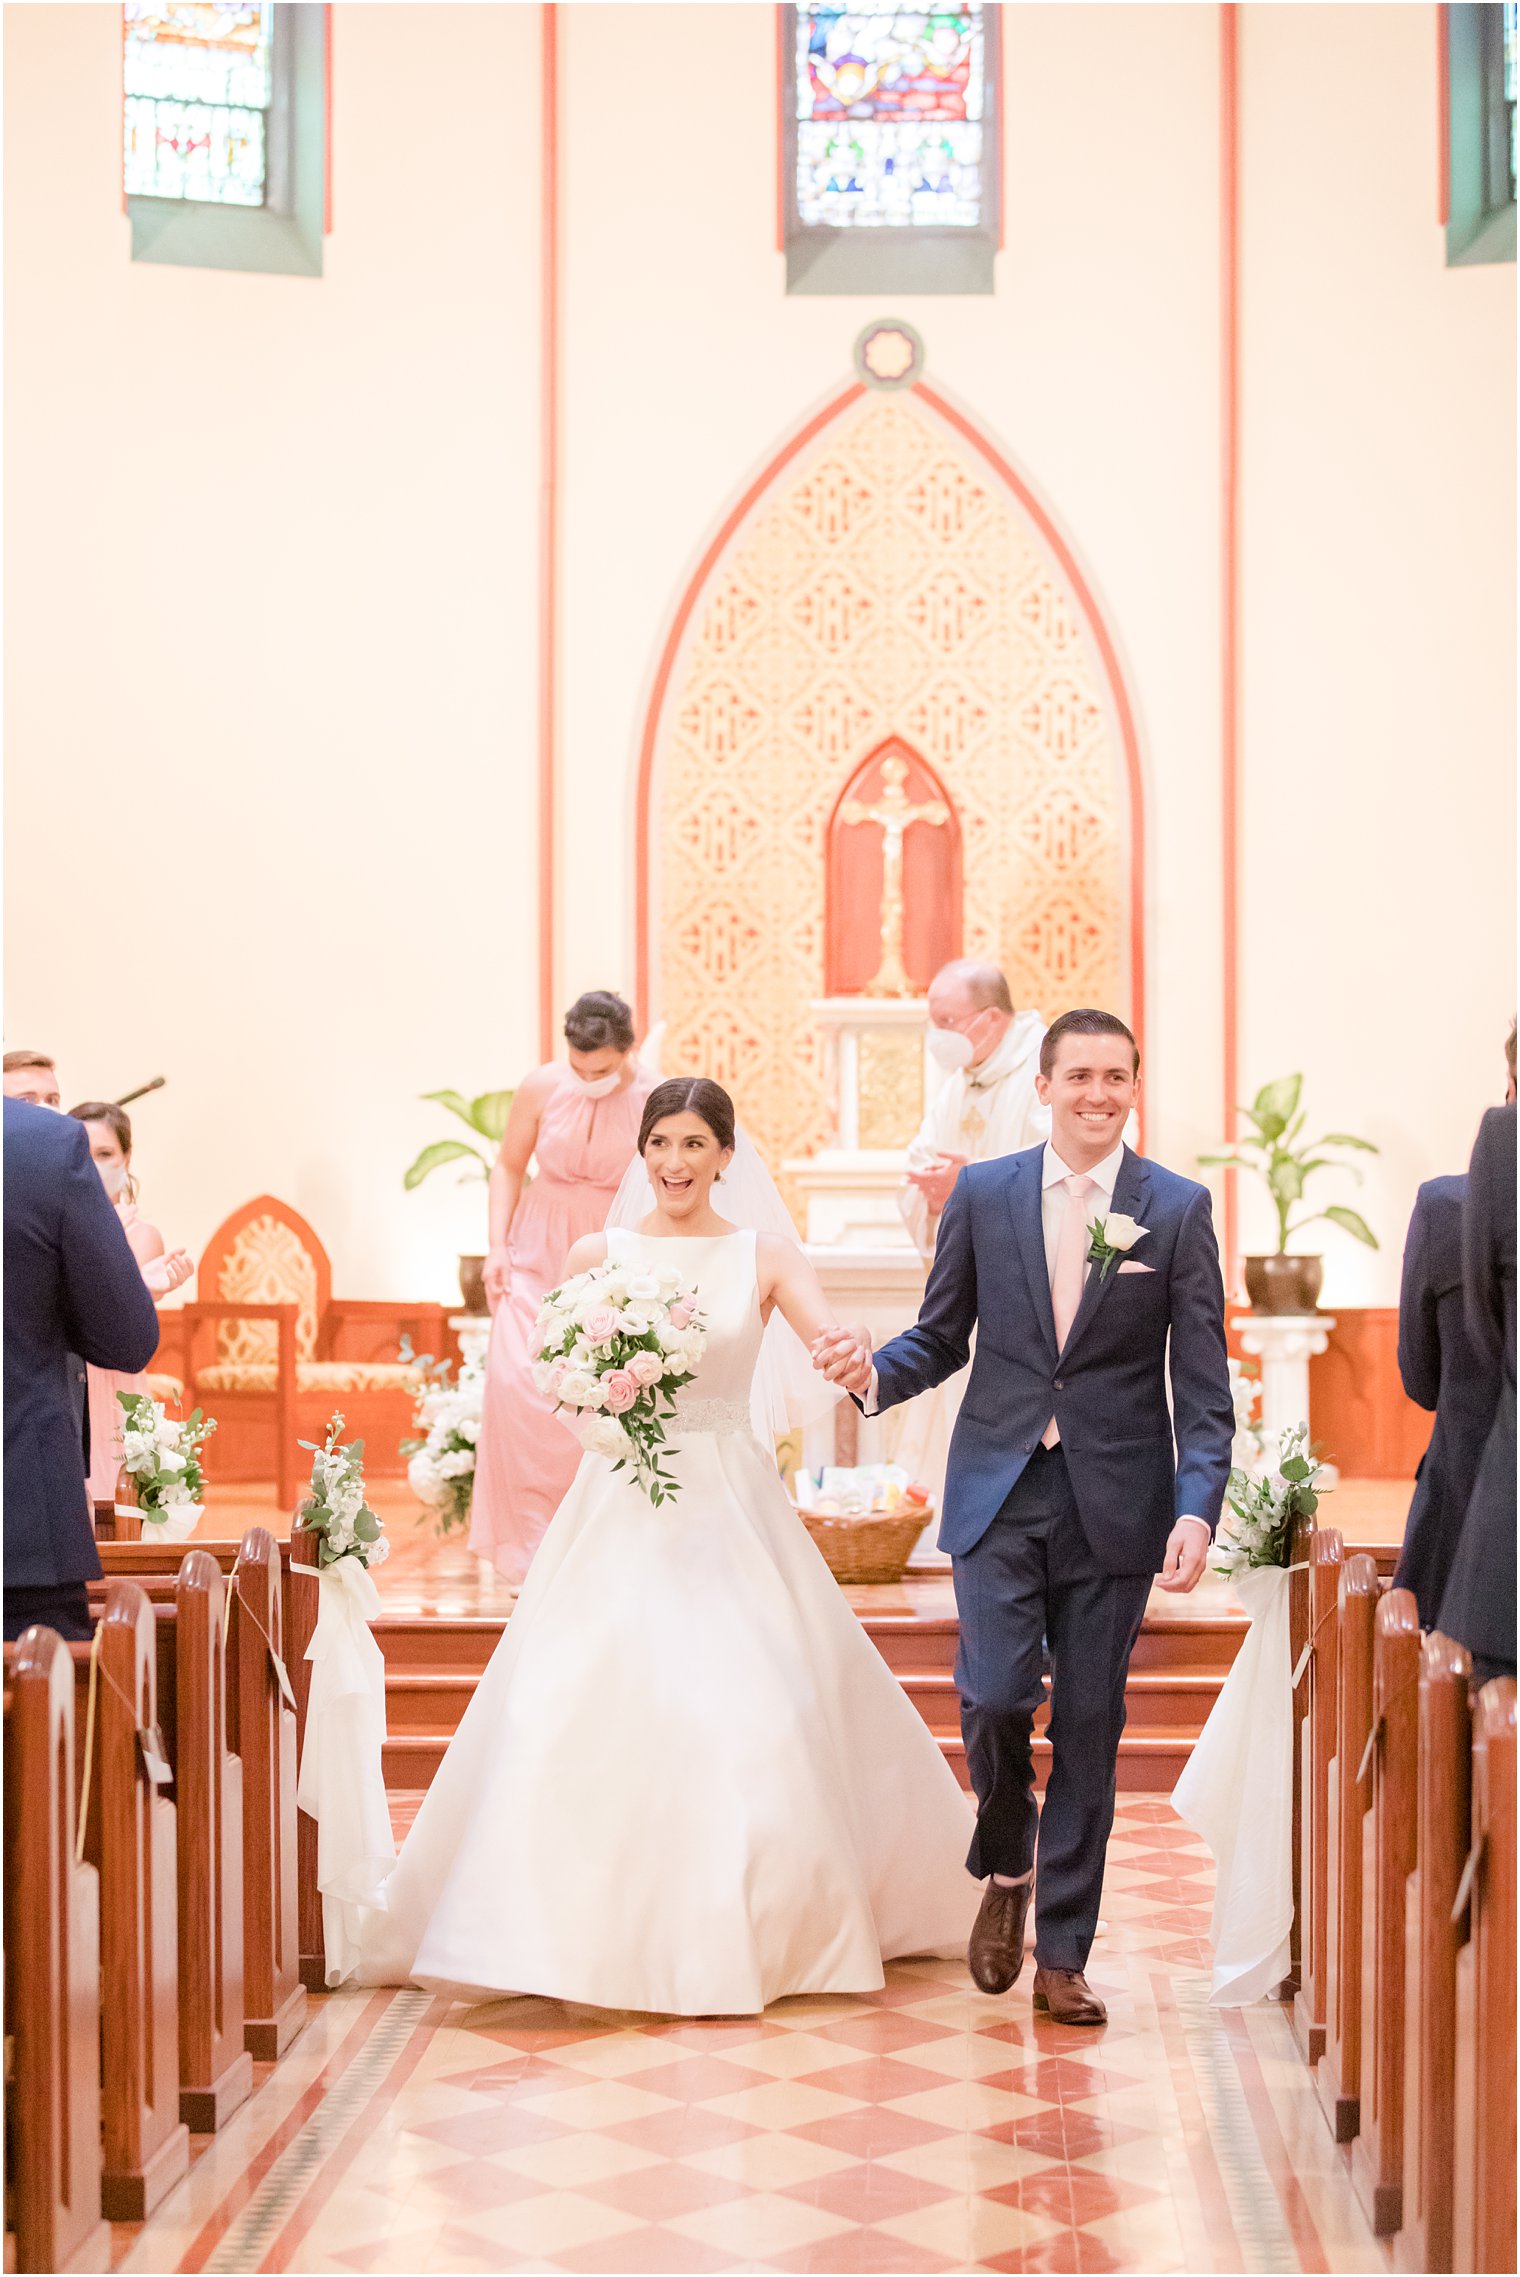 Wedding ceremony recessional at Church of the Assumption in Morristown, NJ